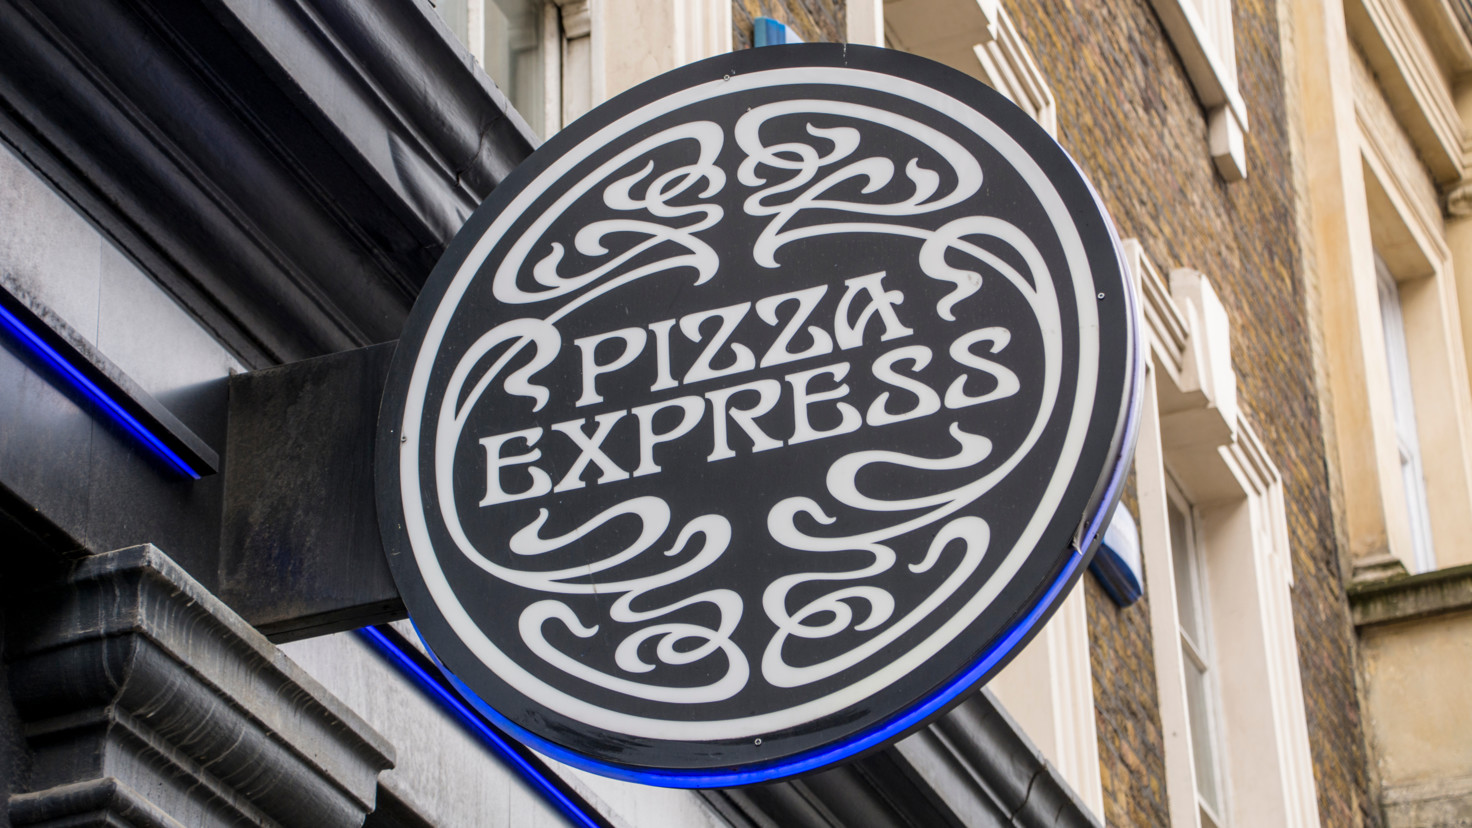 Pizza Express owner to inject 80 million to reduce vast debt 